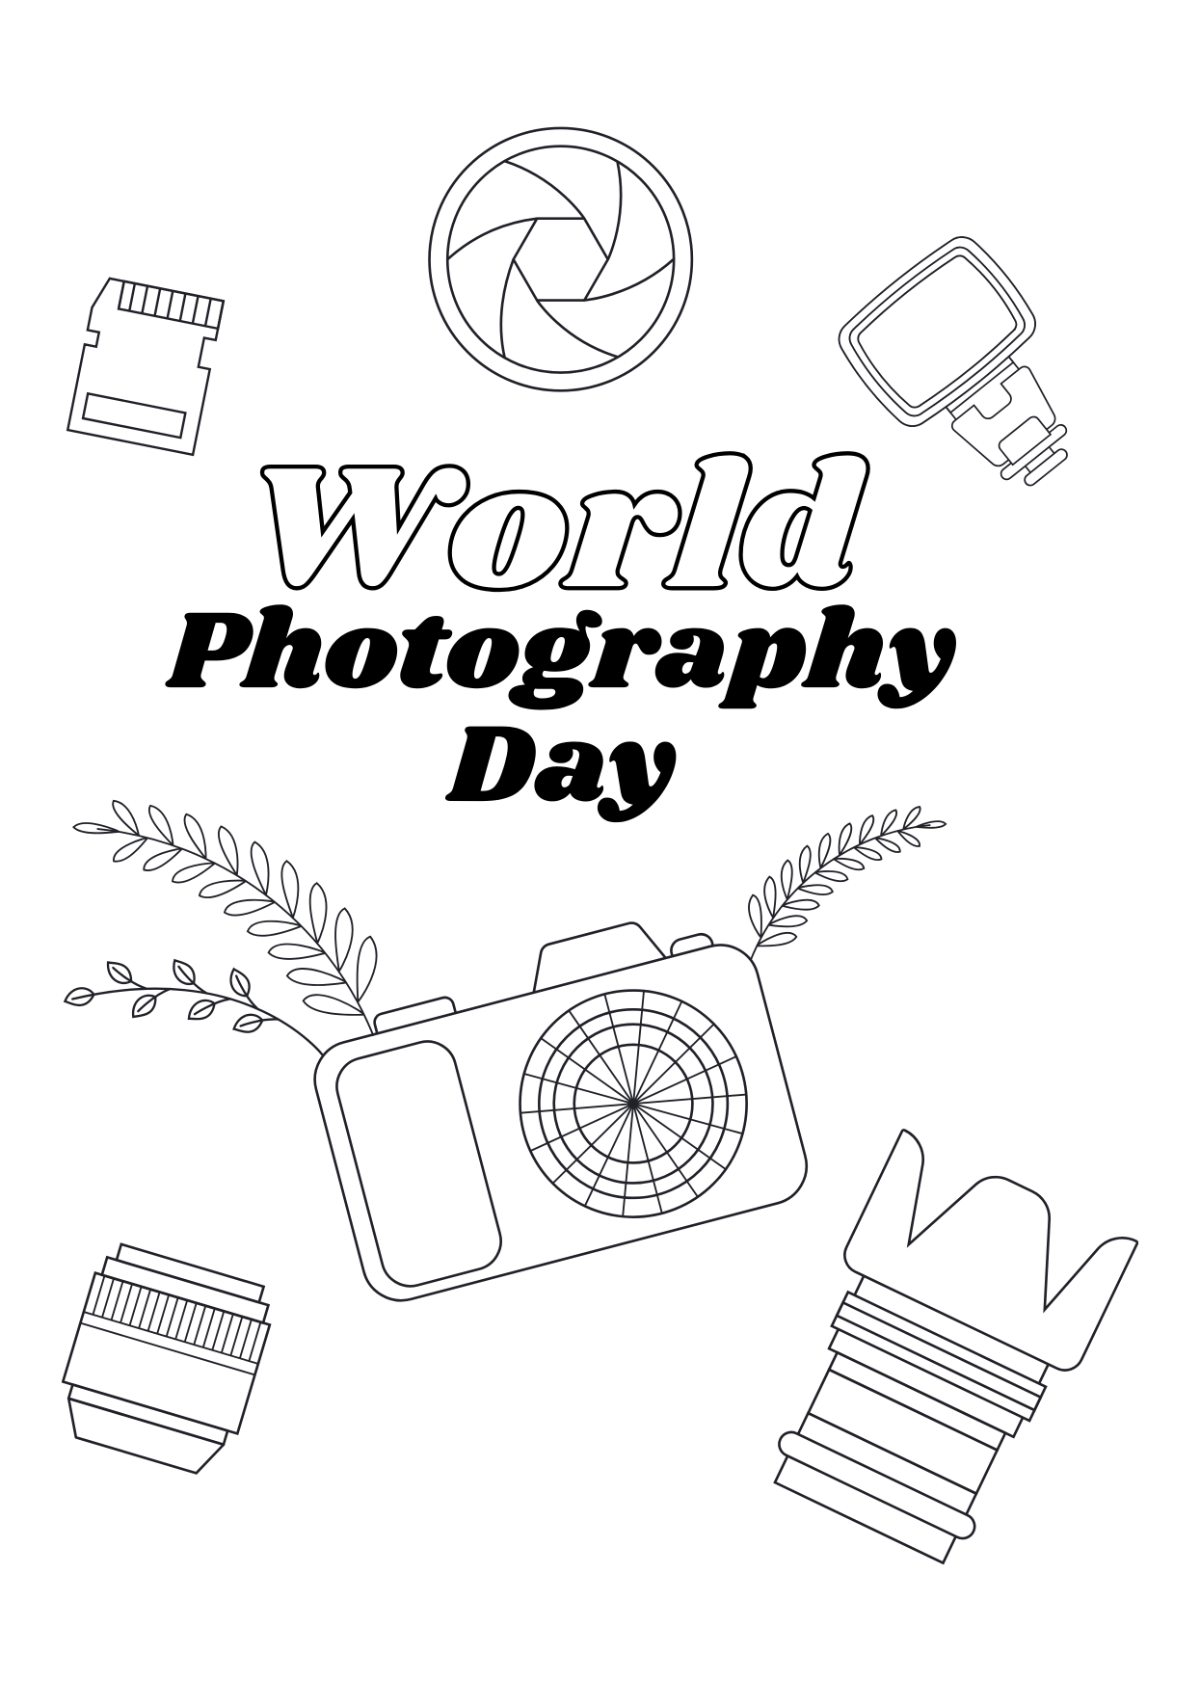 World Photography Day Drawing